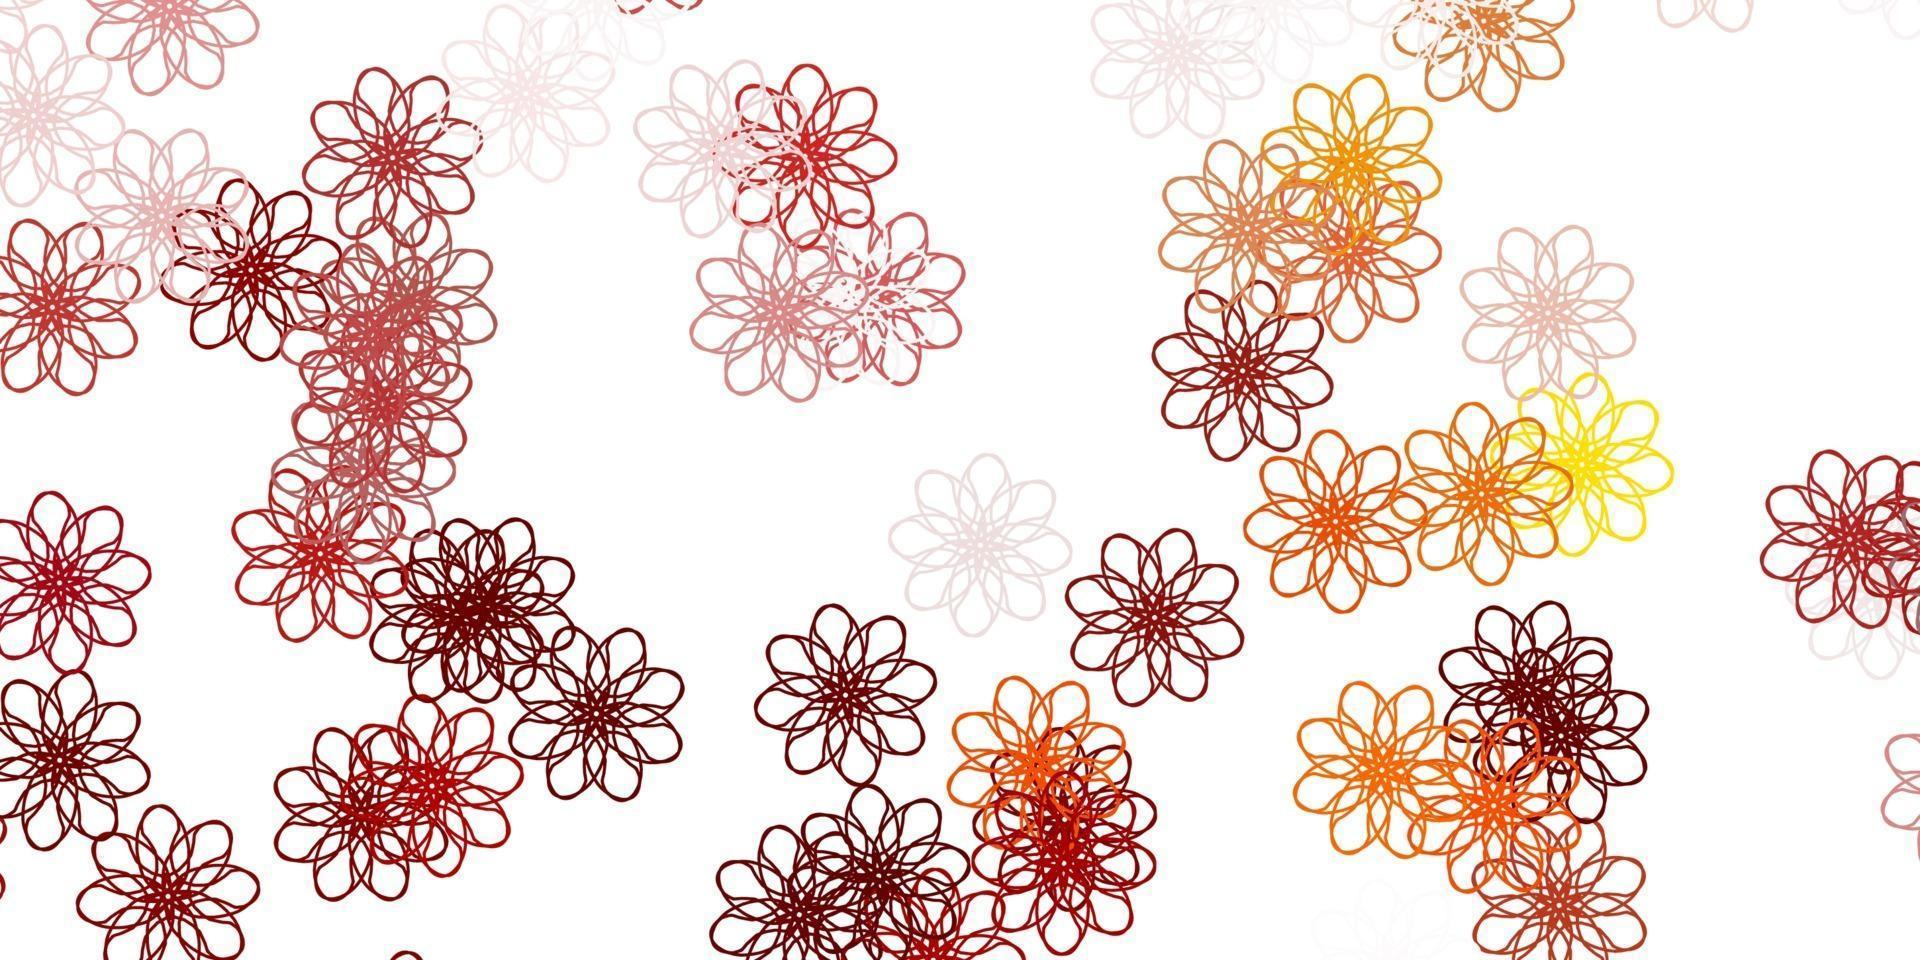 Light Red, Yellow vector natural layout with flowers.